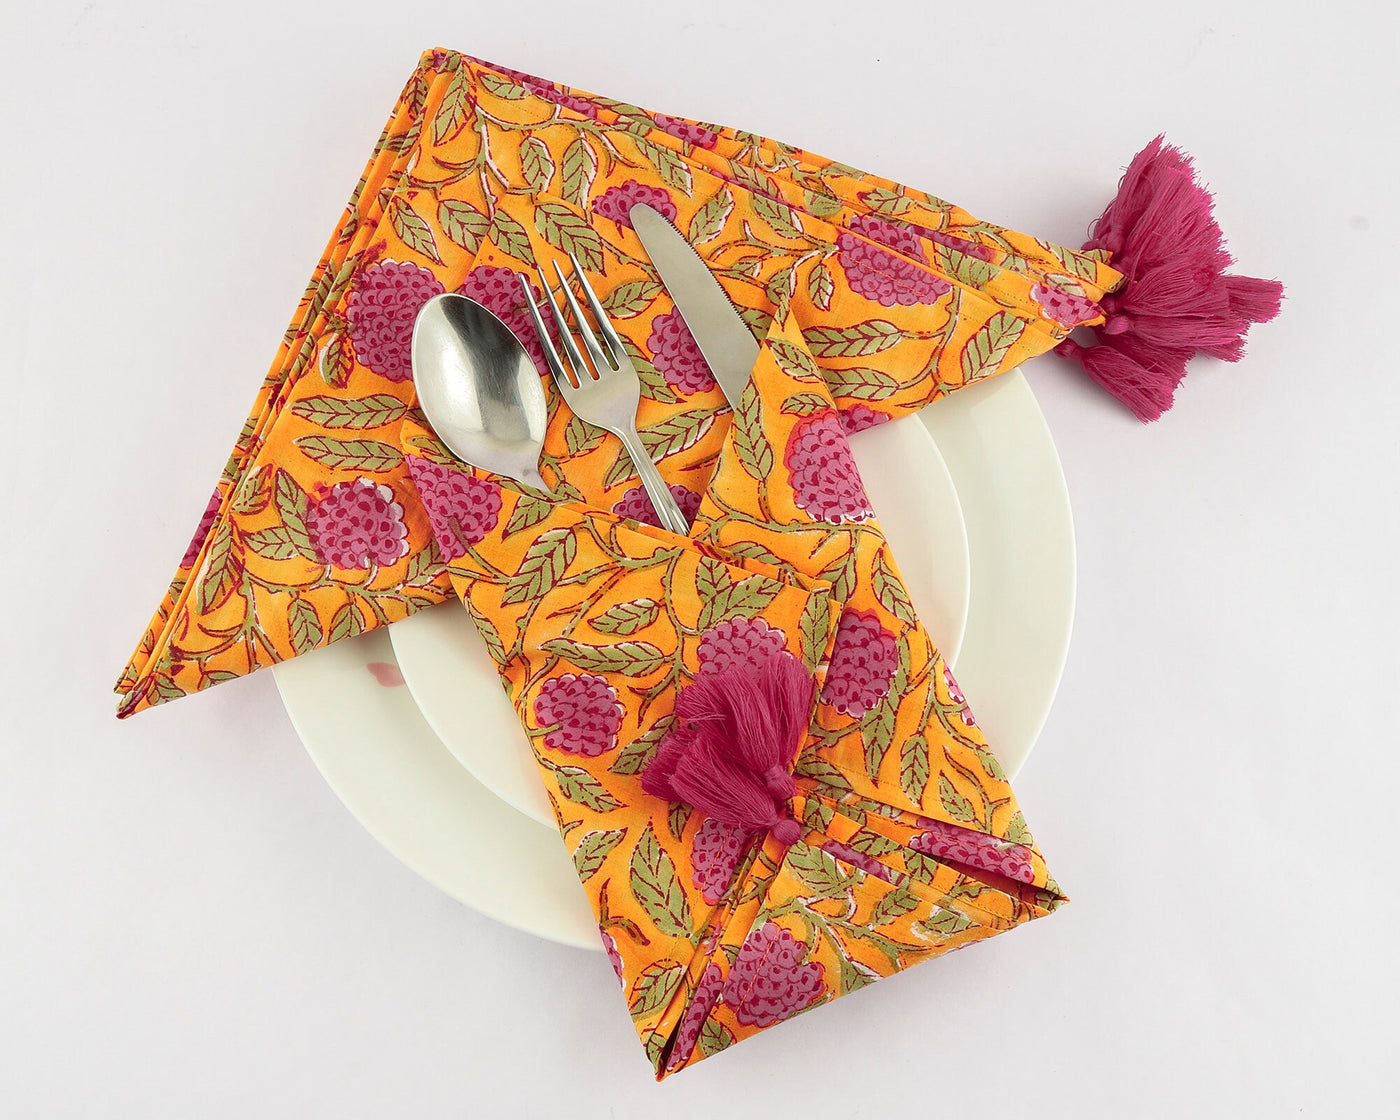 Fabricrush Amber Yellow, Rose Pink, Laurel Green Indian Hand Block Floral Printed Cotton Cloth Napkins Wedding Event Party, 18x18"-Cocktail 20x20"-Dinner